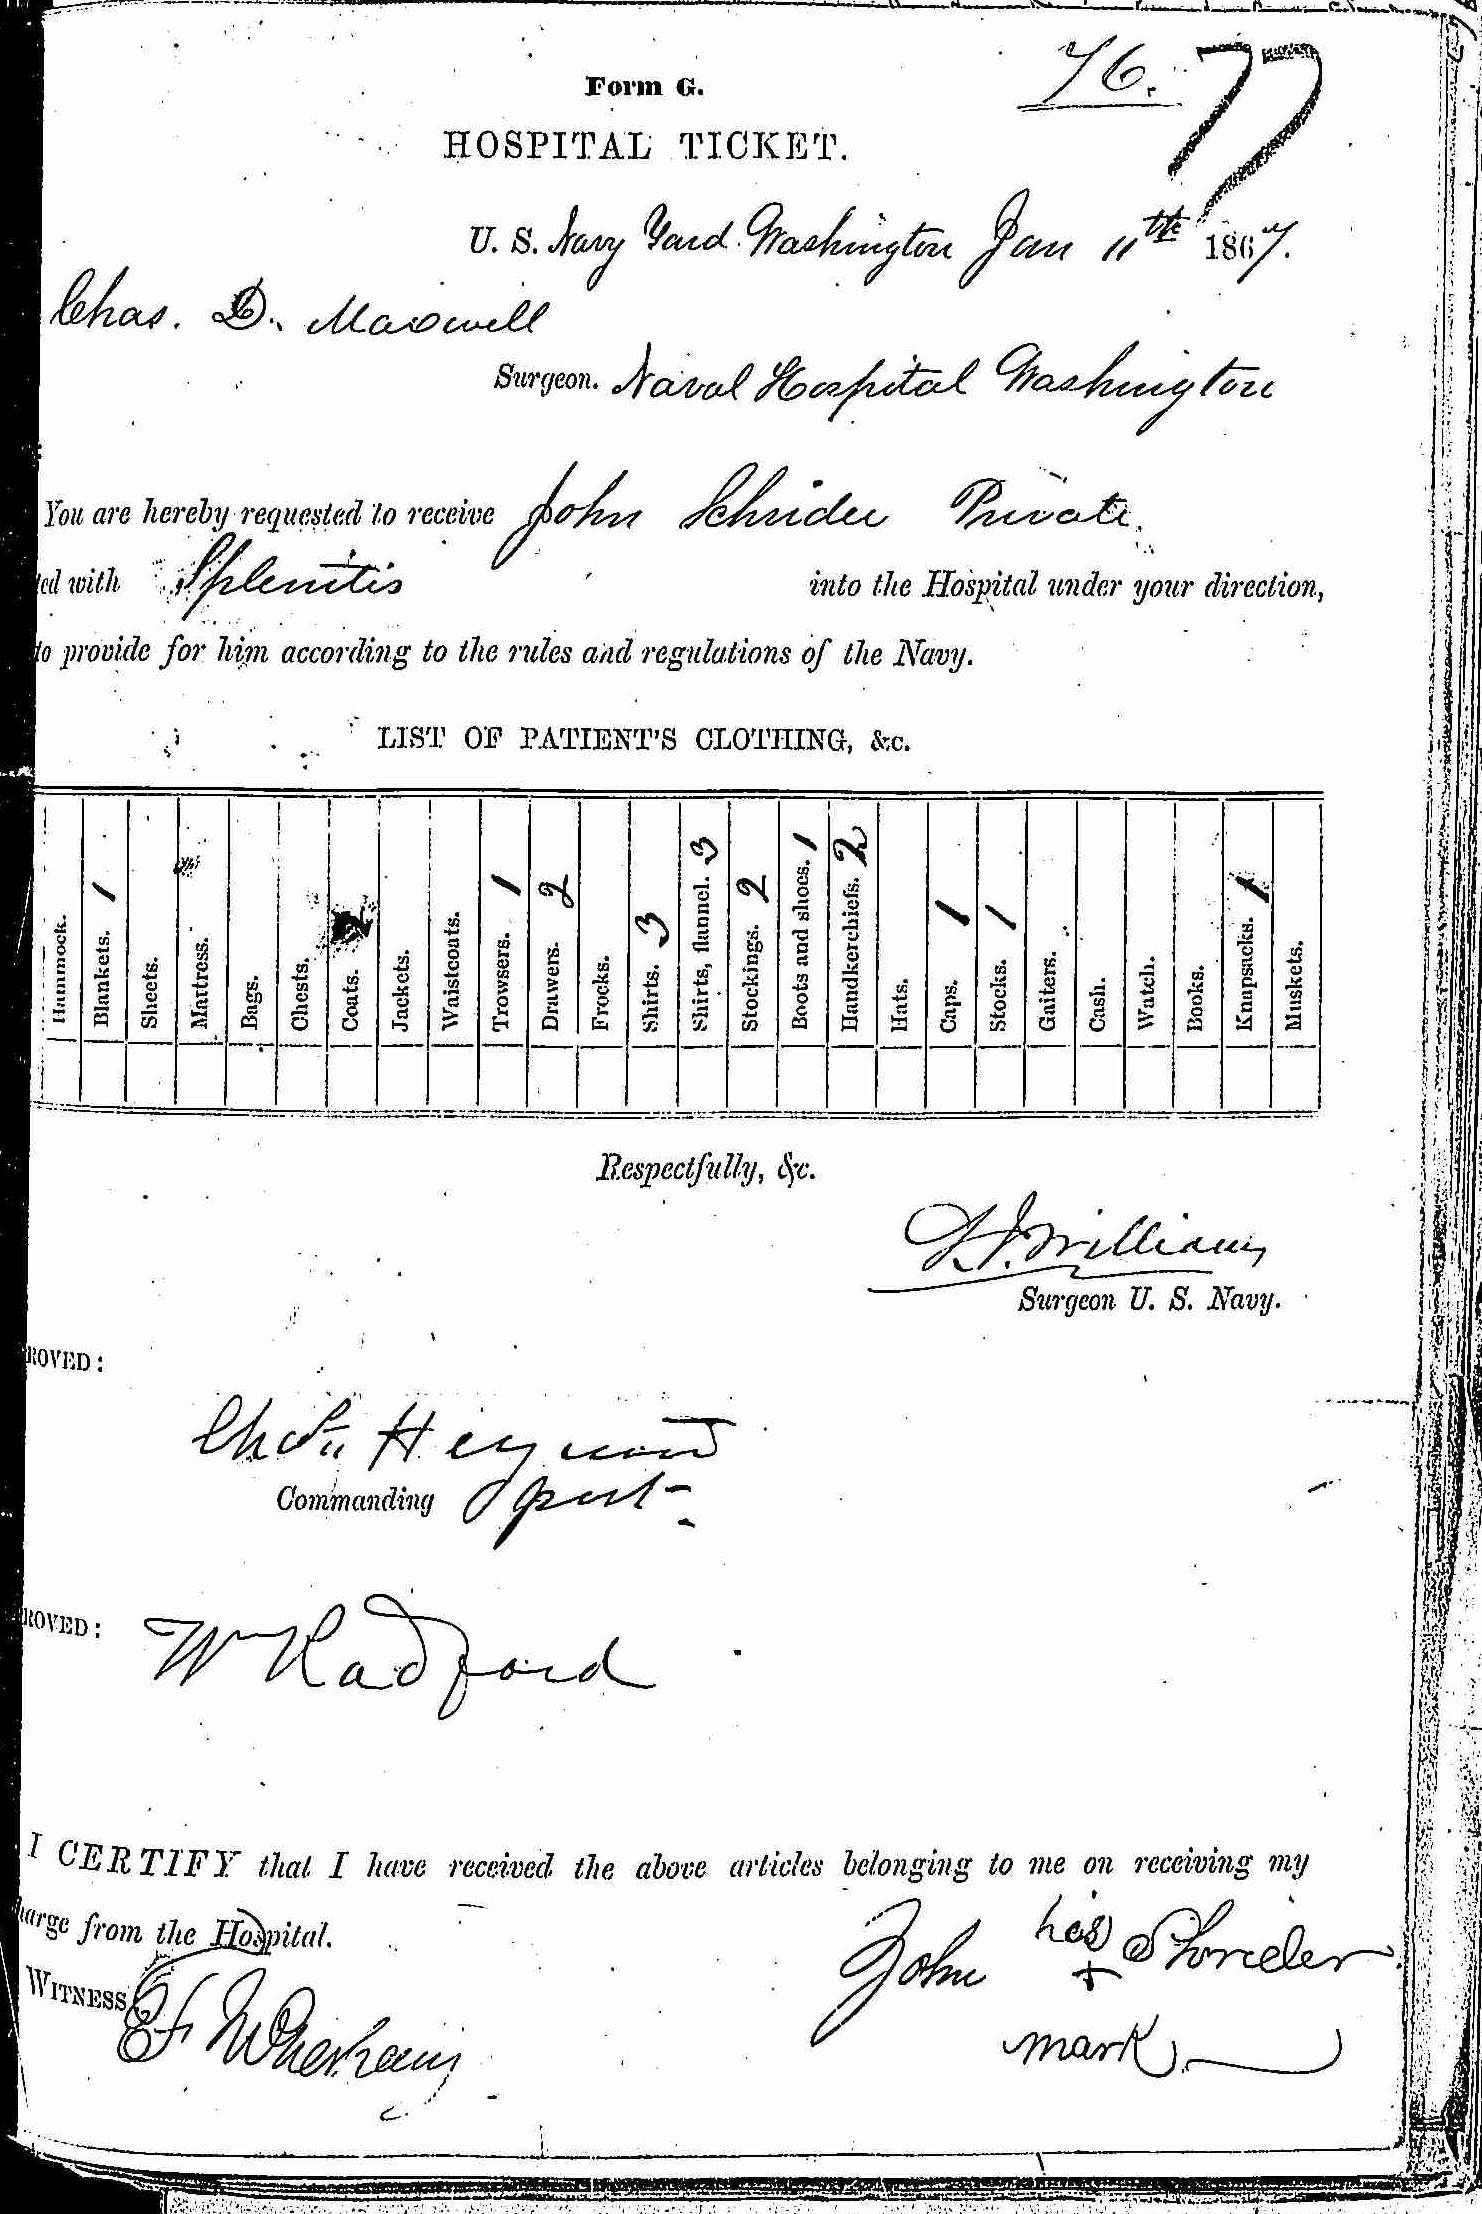 Entry for John Schrider (second admission page 1 of 2) in the log Hospital Tickets and Case Papers - Naval Hospital - Washington, D.C. - 1865-68